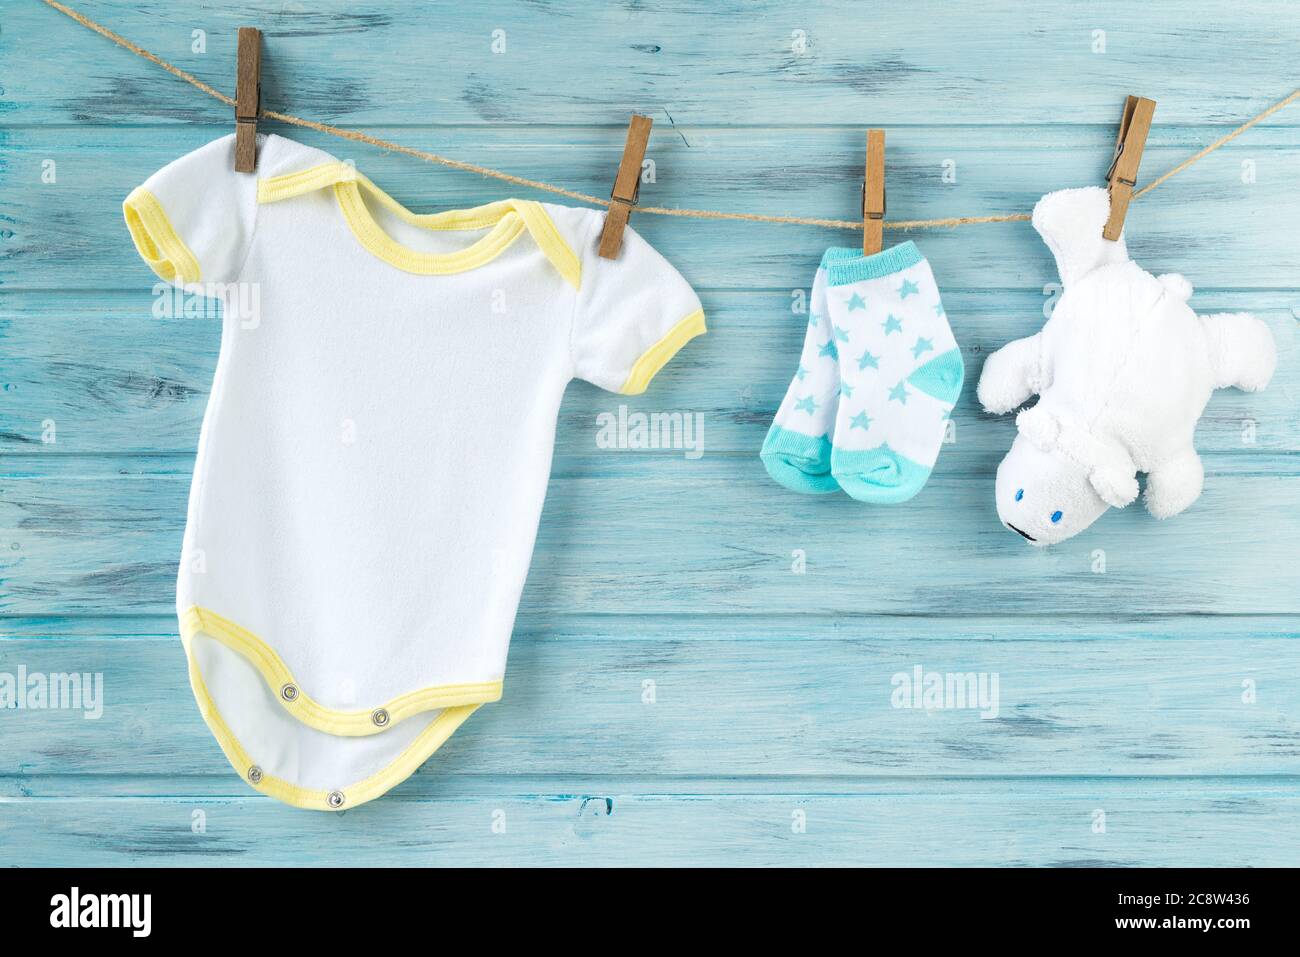 Baby clothes and white bear toy on a clothesline Stock Photo